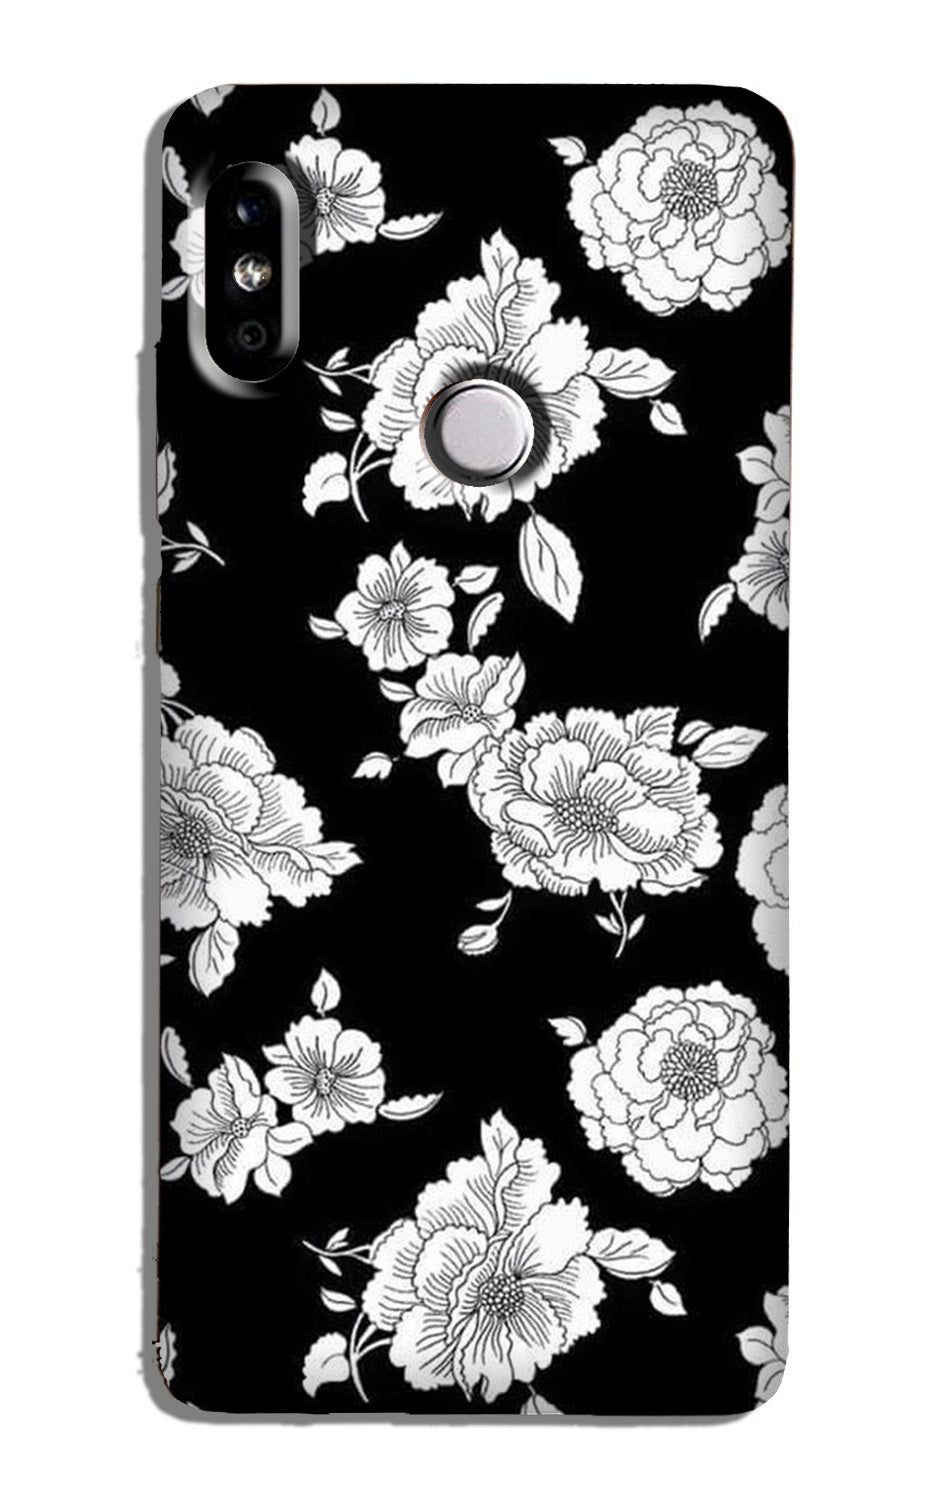 White flowers Black Background Case for Redmi Note 6 Pro